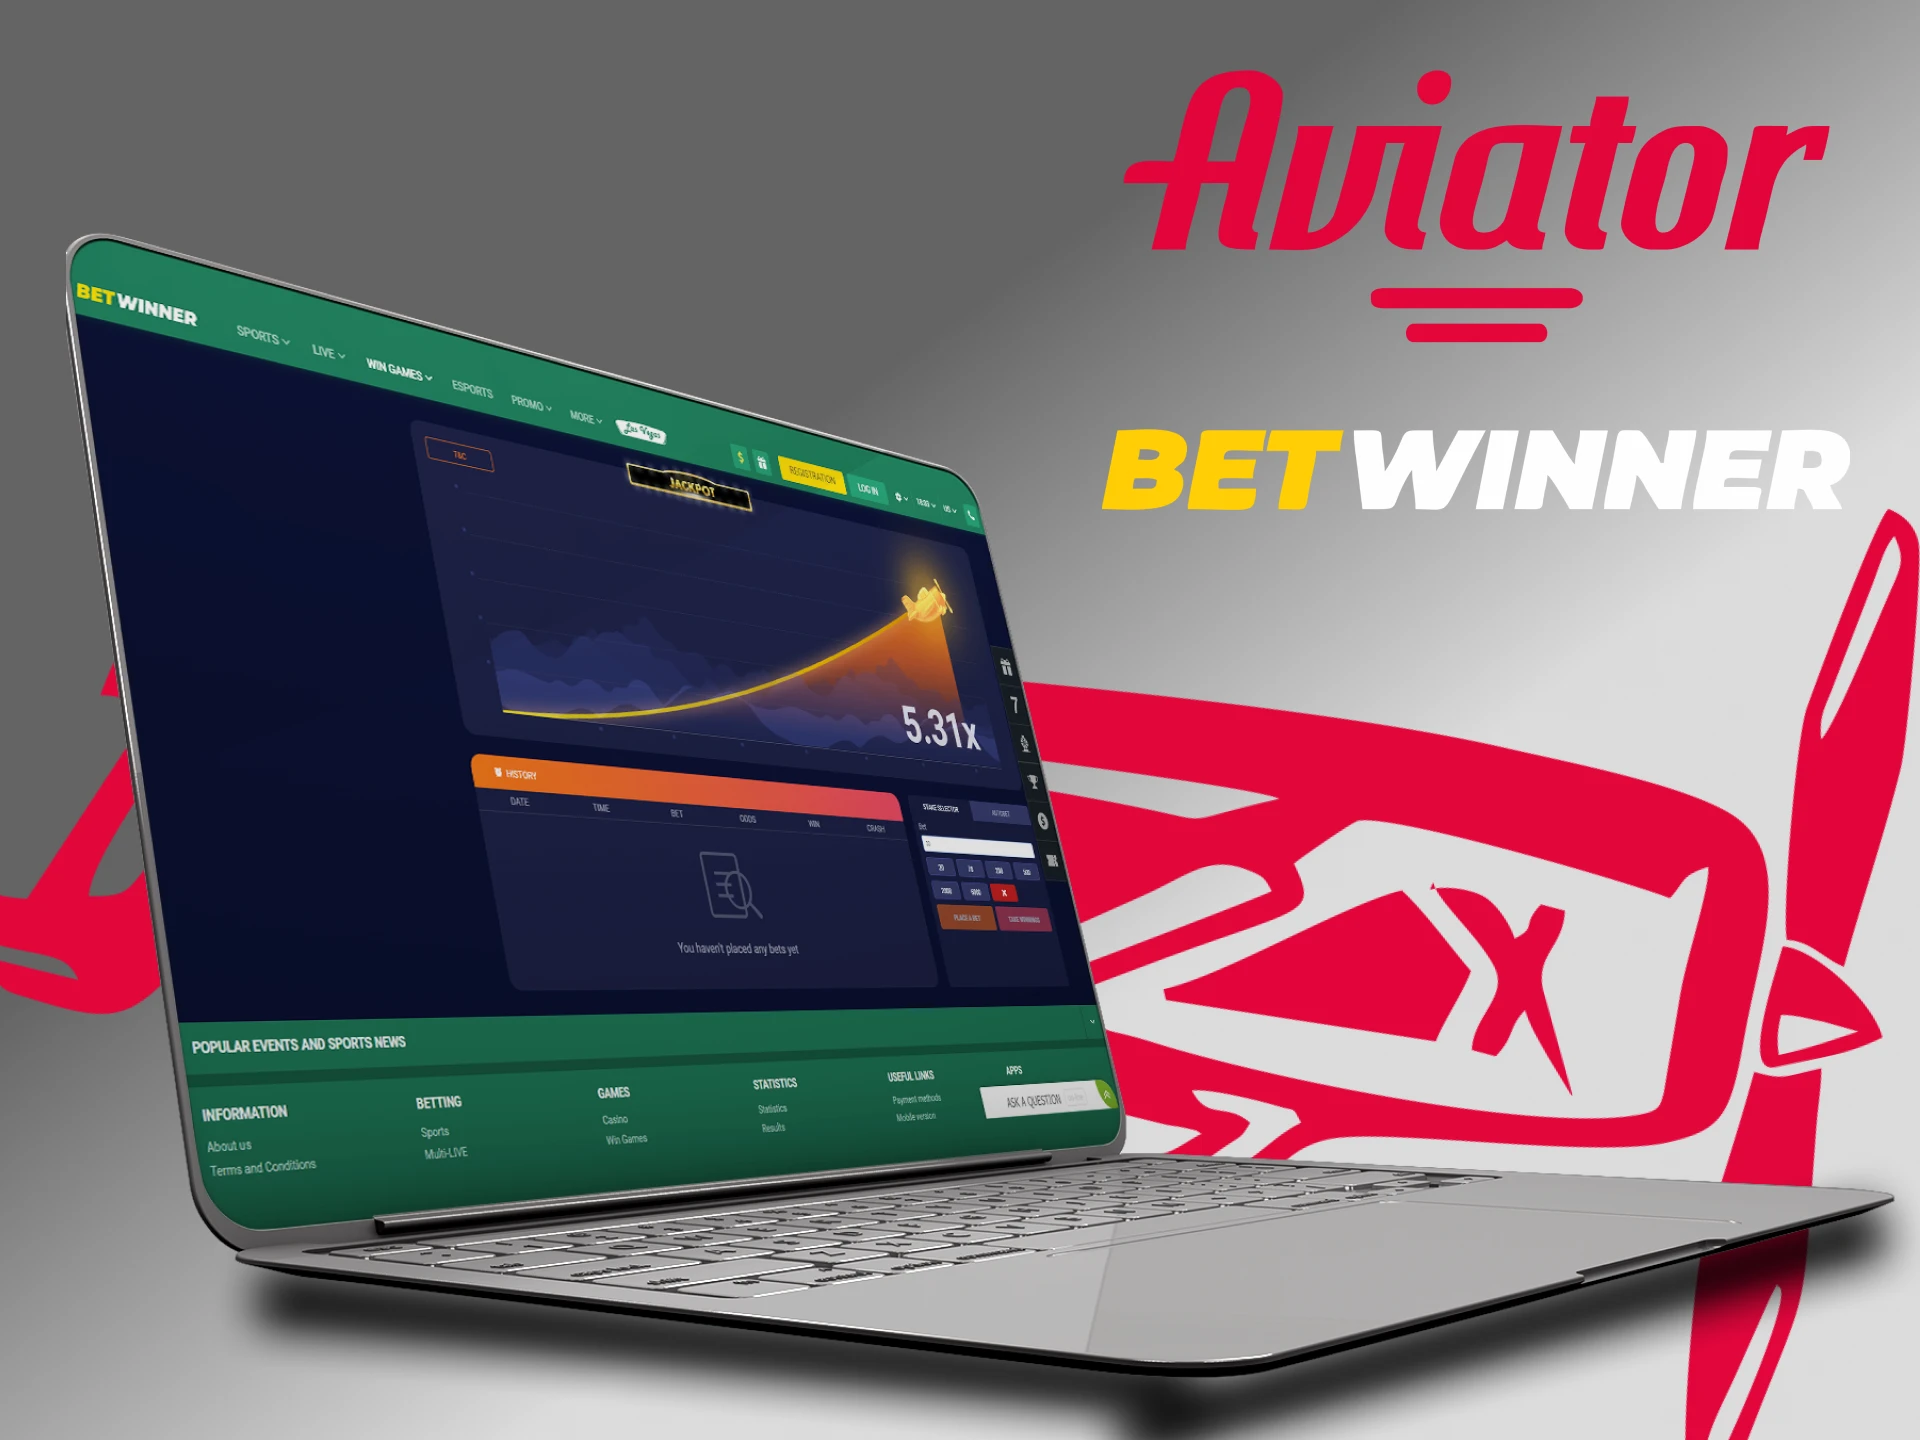 You can play the Aviator game on the Betwinner website.